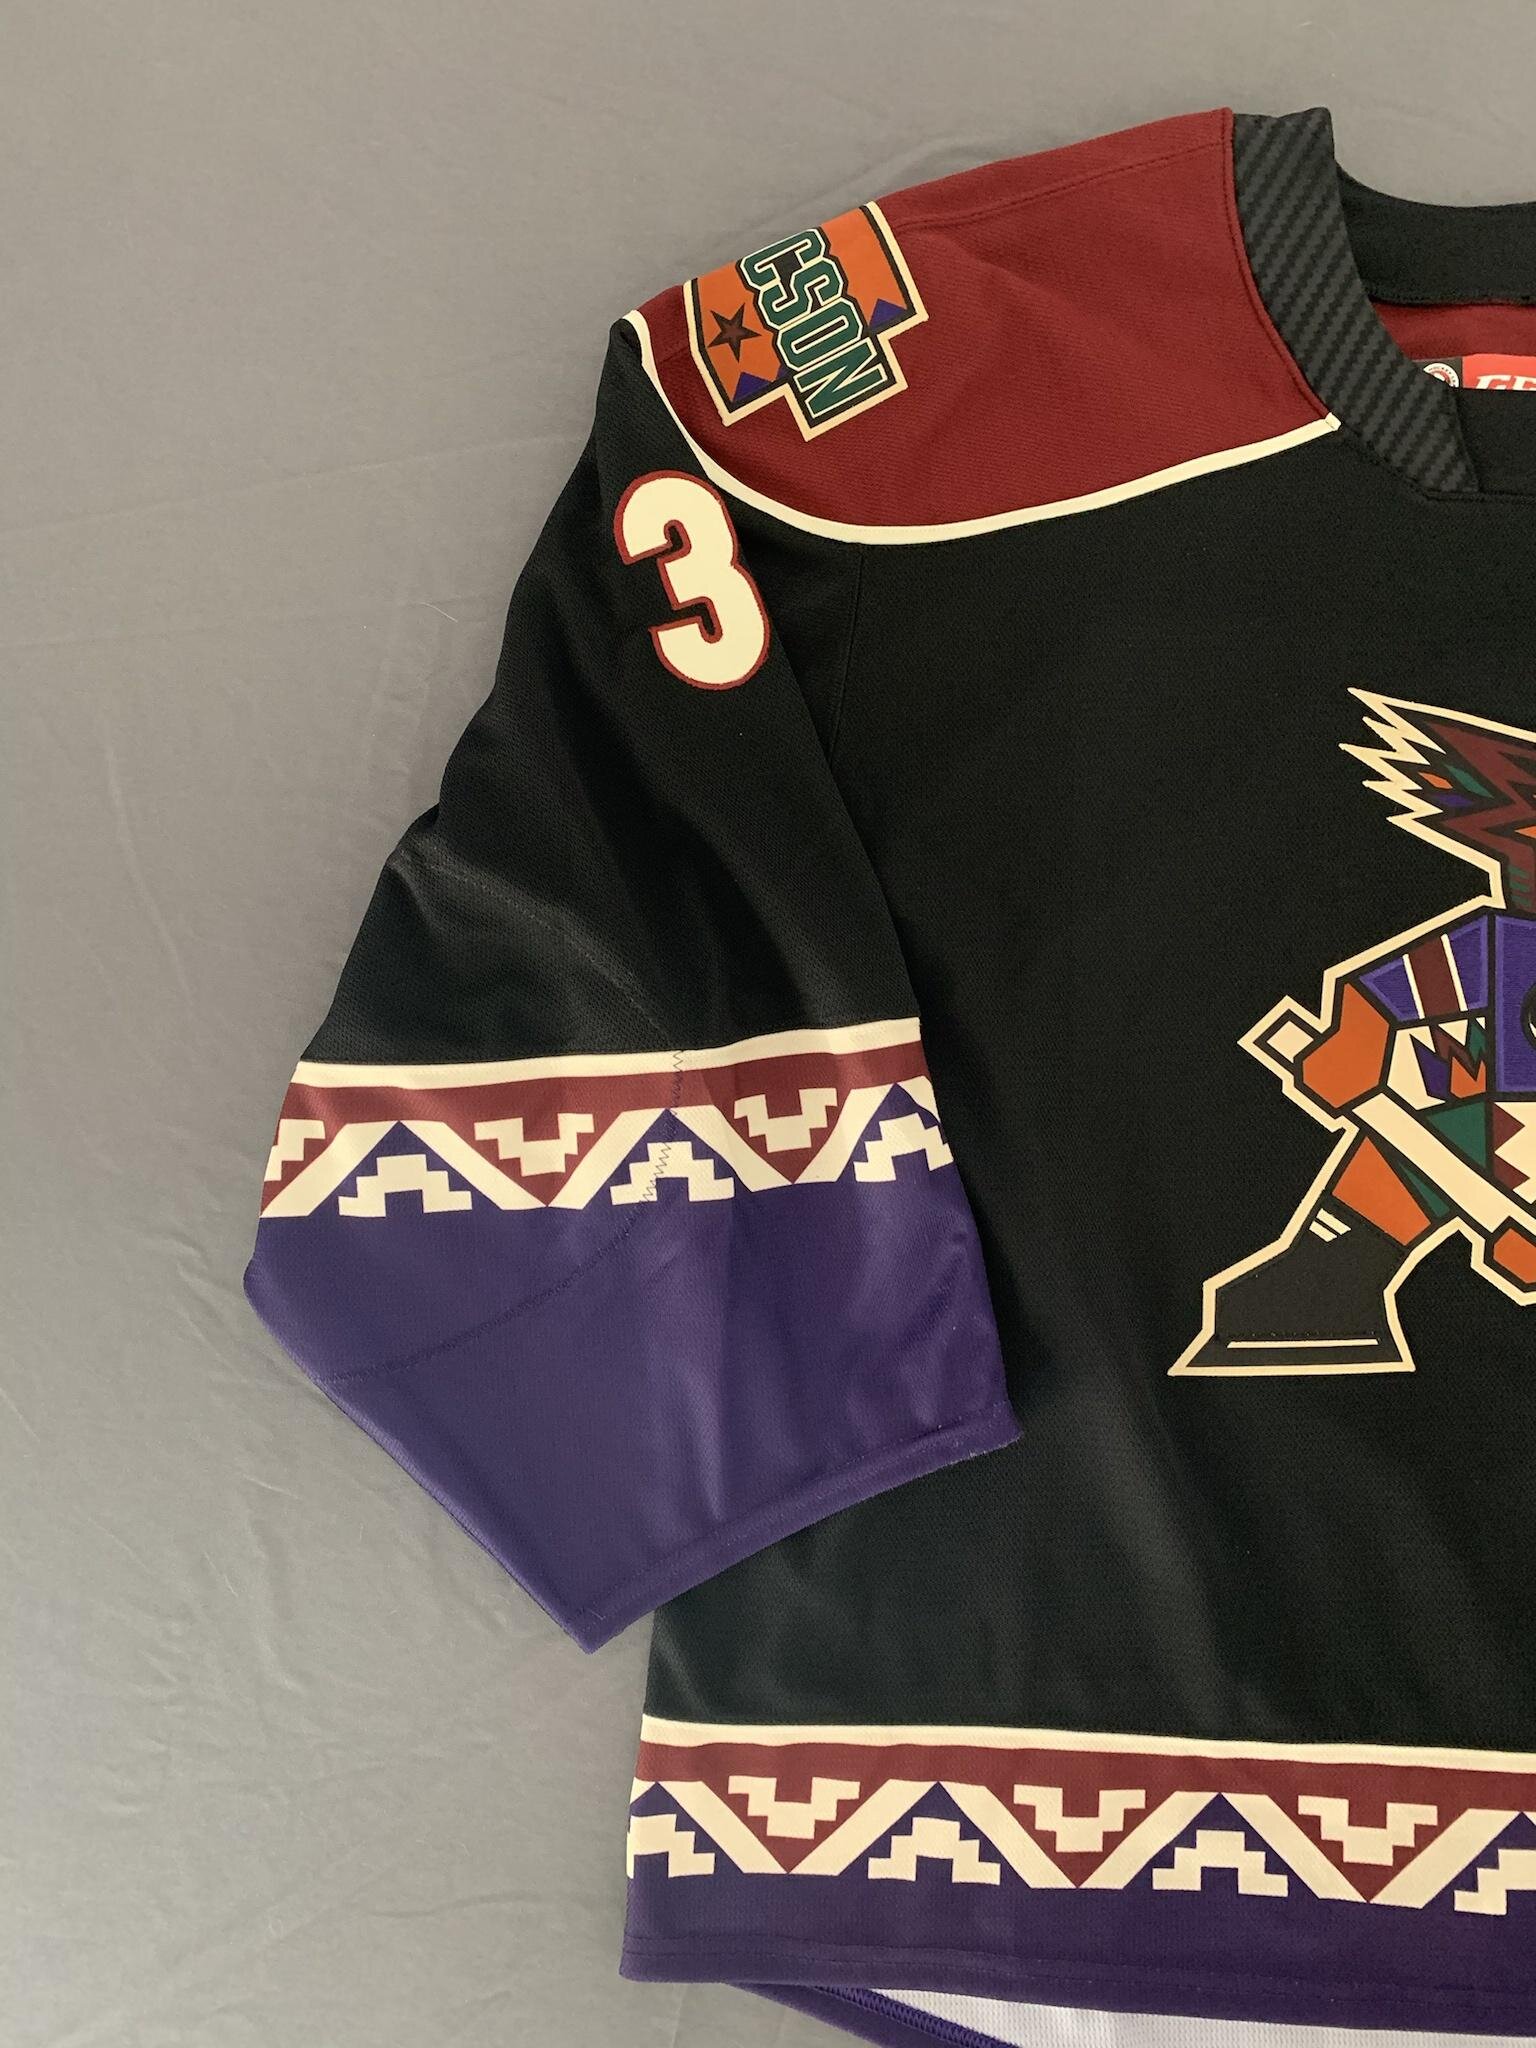 Tucson Roadrunners - Time is running out! ⌛️ Adin Hill Game Worn Kachina  Jersey Auction ends tonight! 🌵🏜 💸 bit.ly/313Qfqr #LetsGoTucson  #RRFanWeek